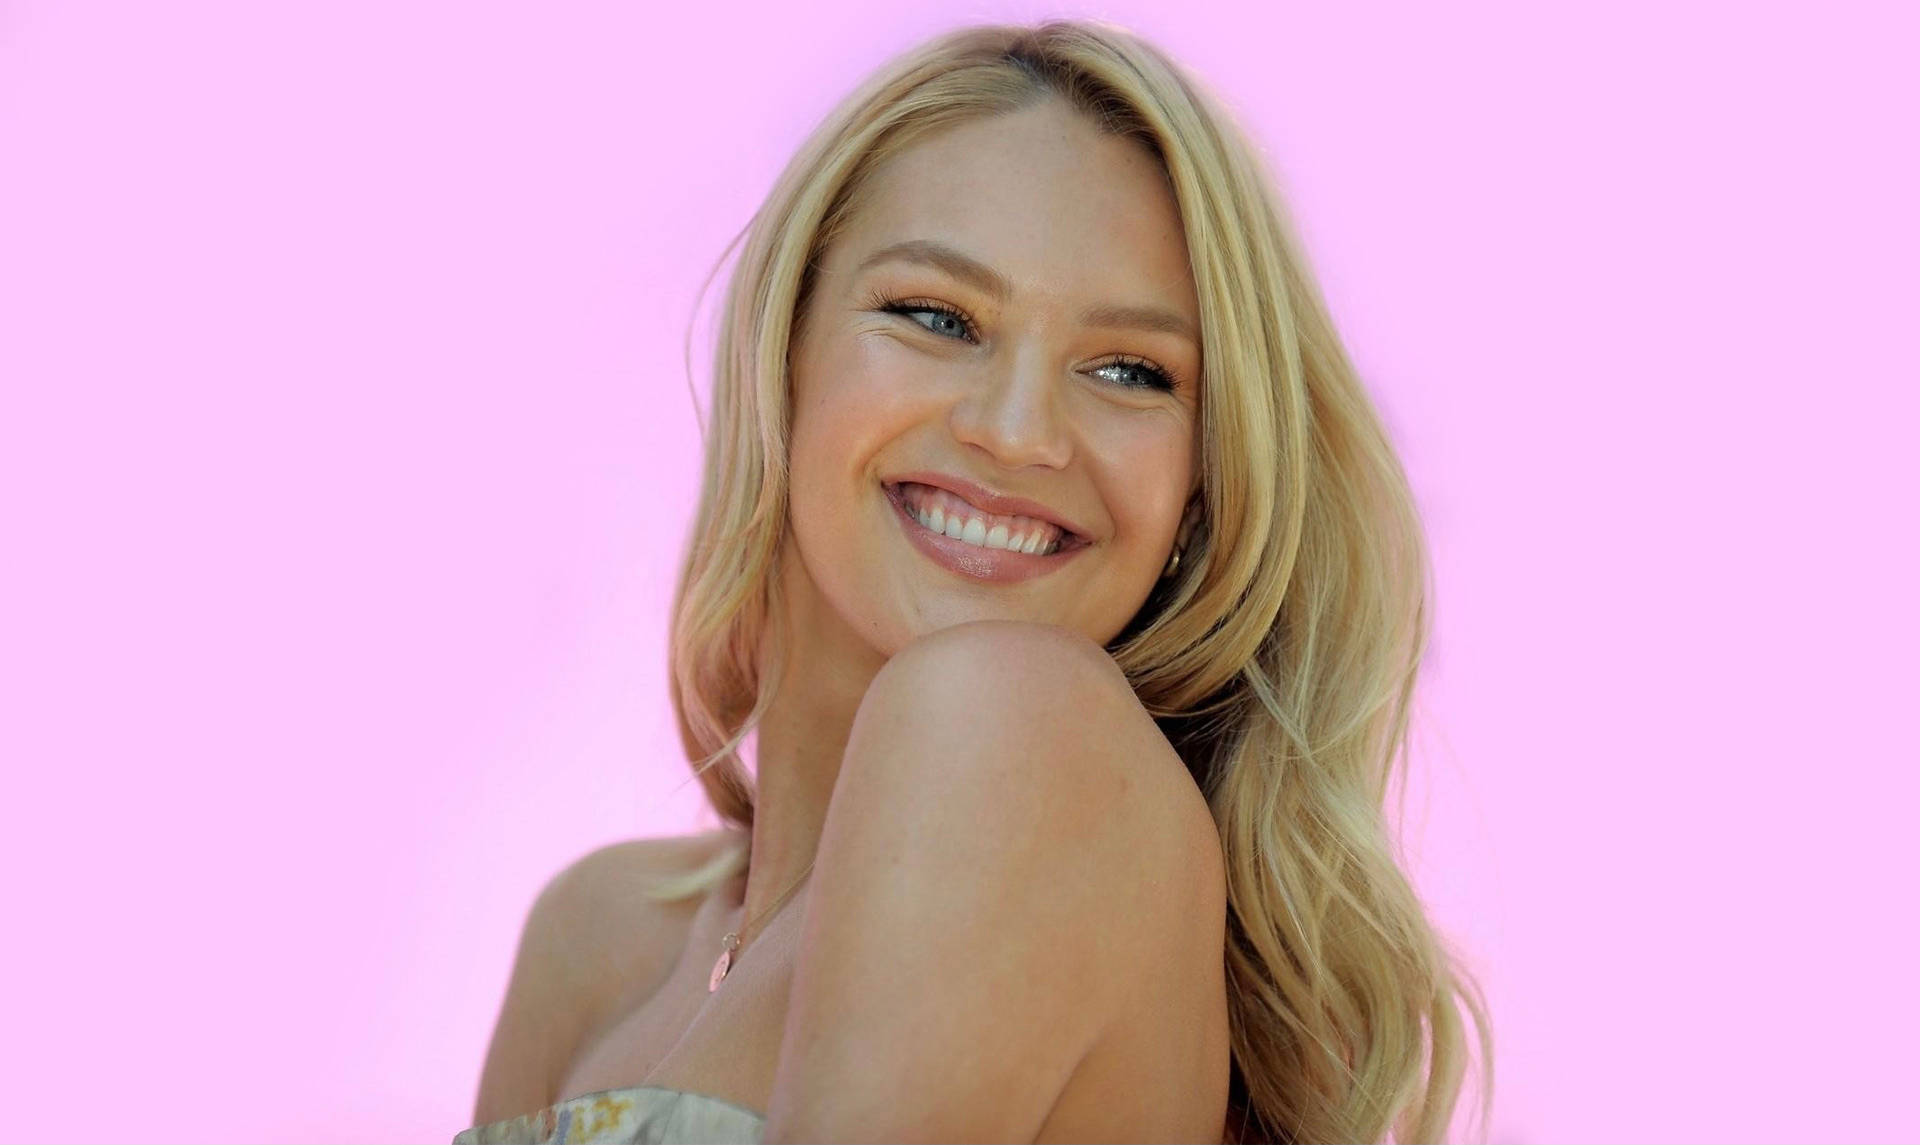 South African Supermodel Candice Swanepoel Smiling Lovingly On A Bright Pink Background